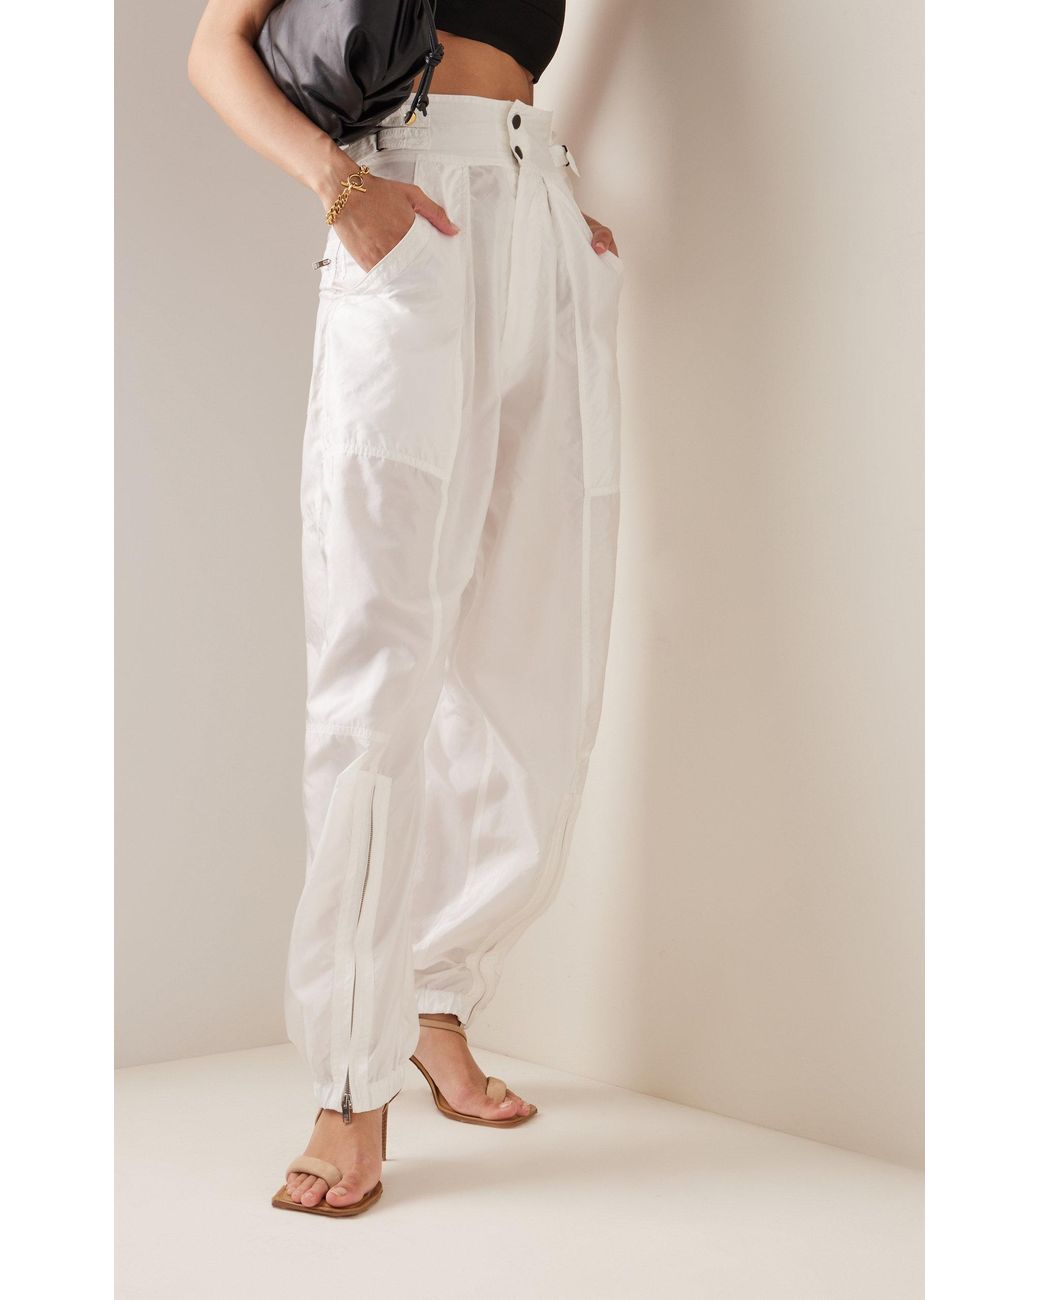 Isabel Marant Shell Jogger Pants in White Lyst